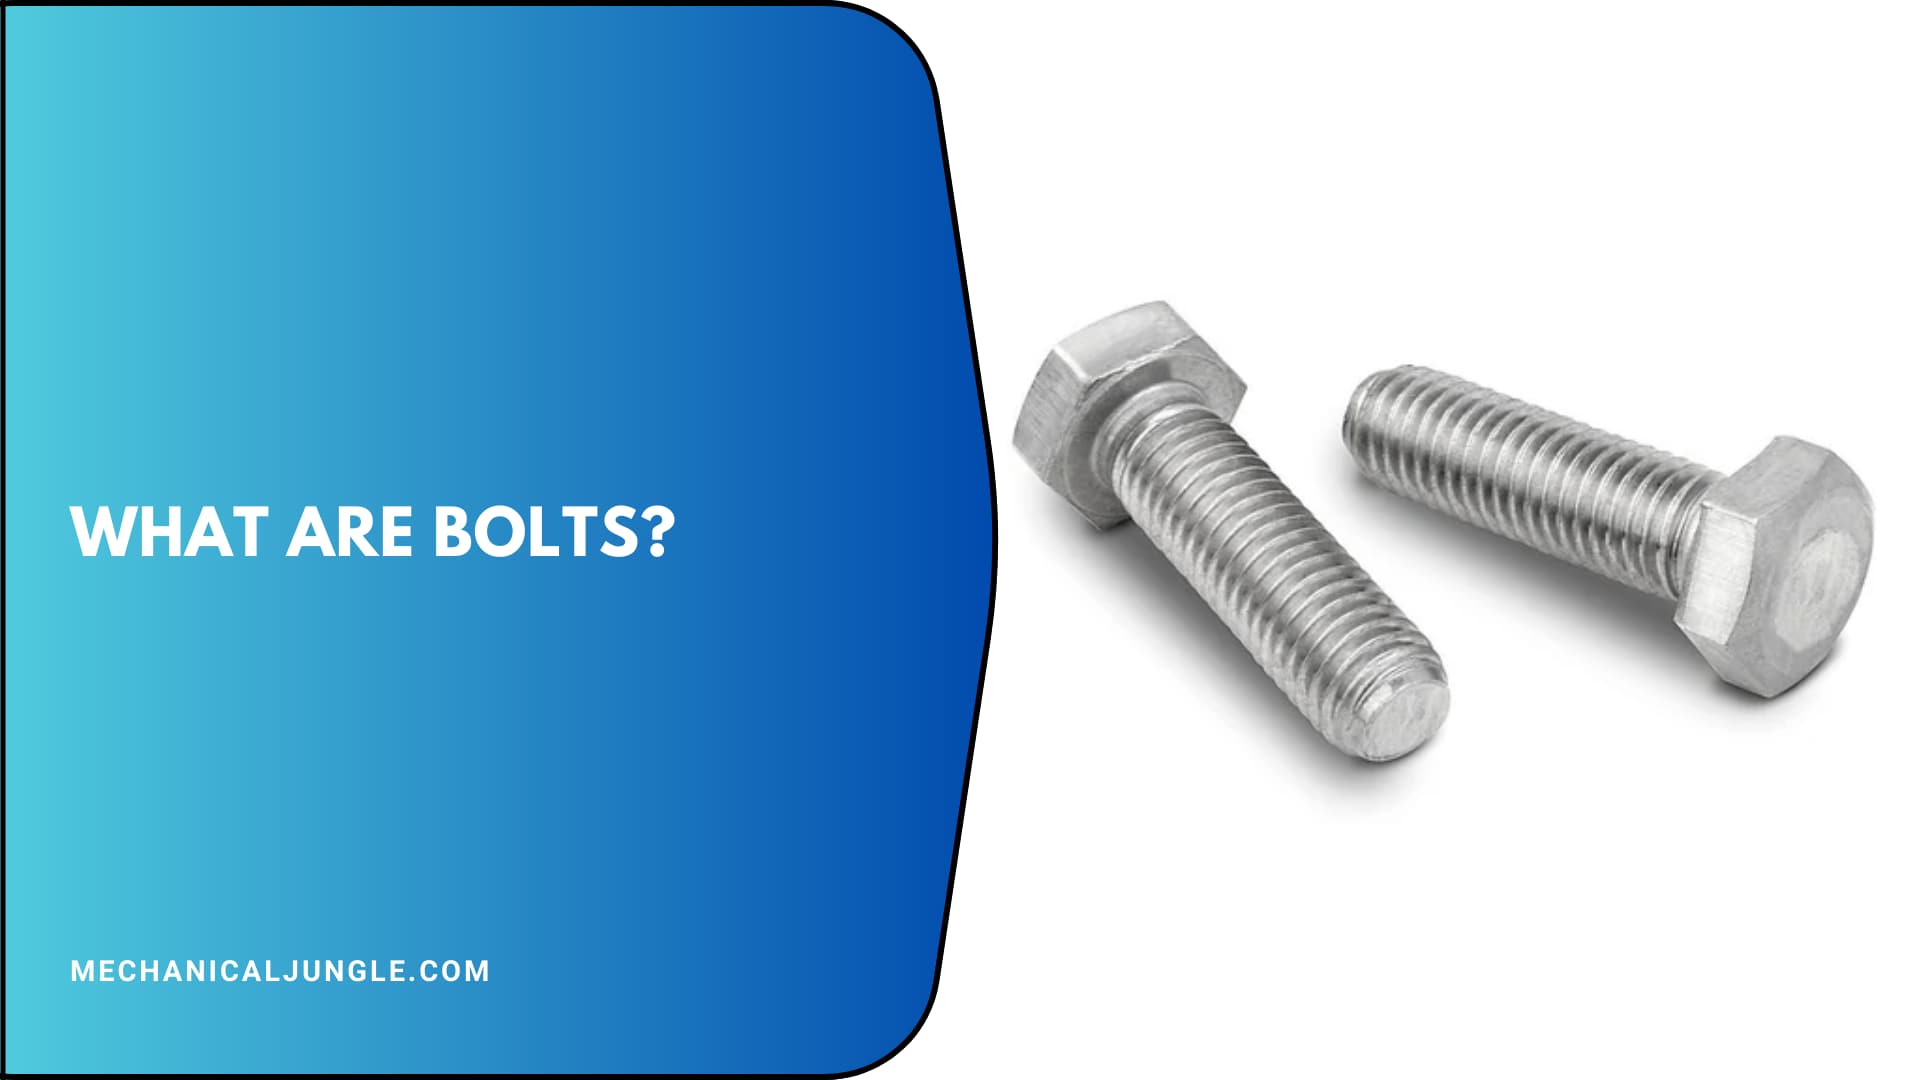 What Are Bolts?